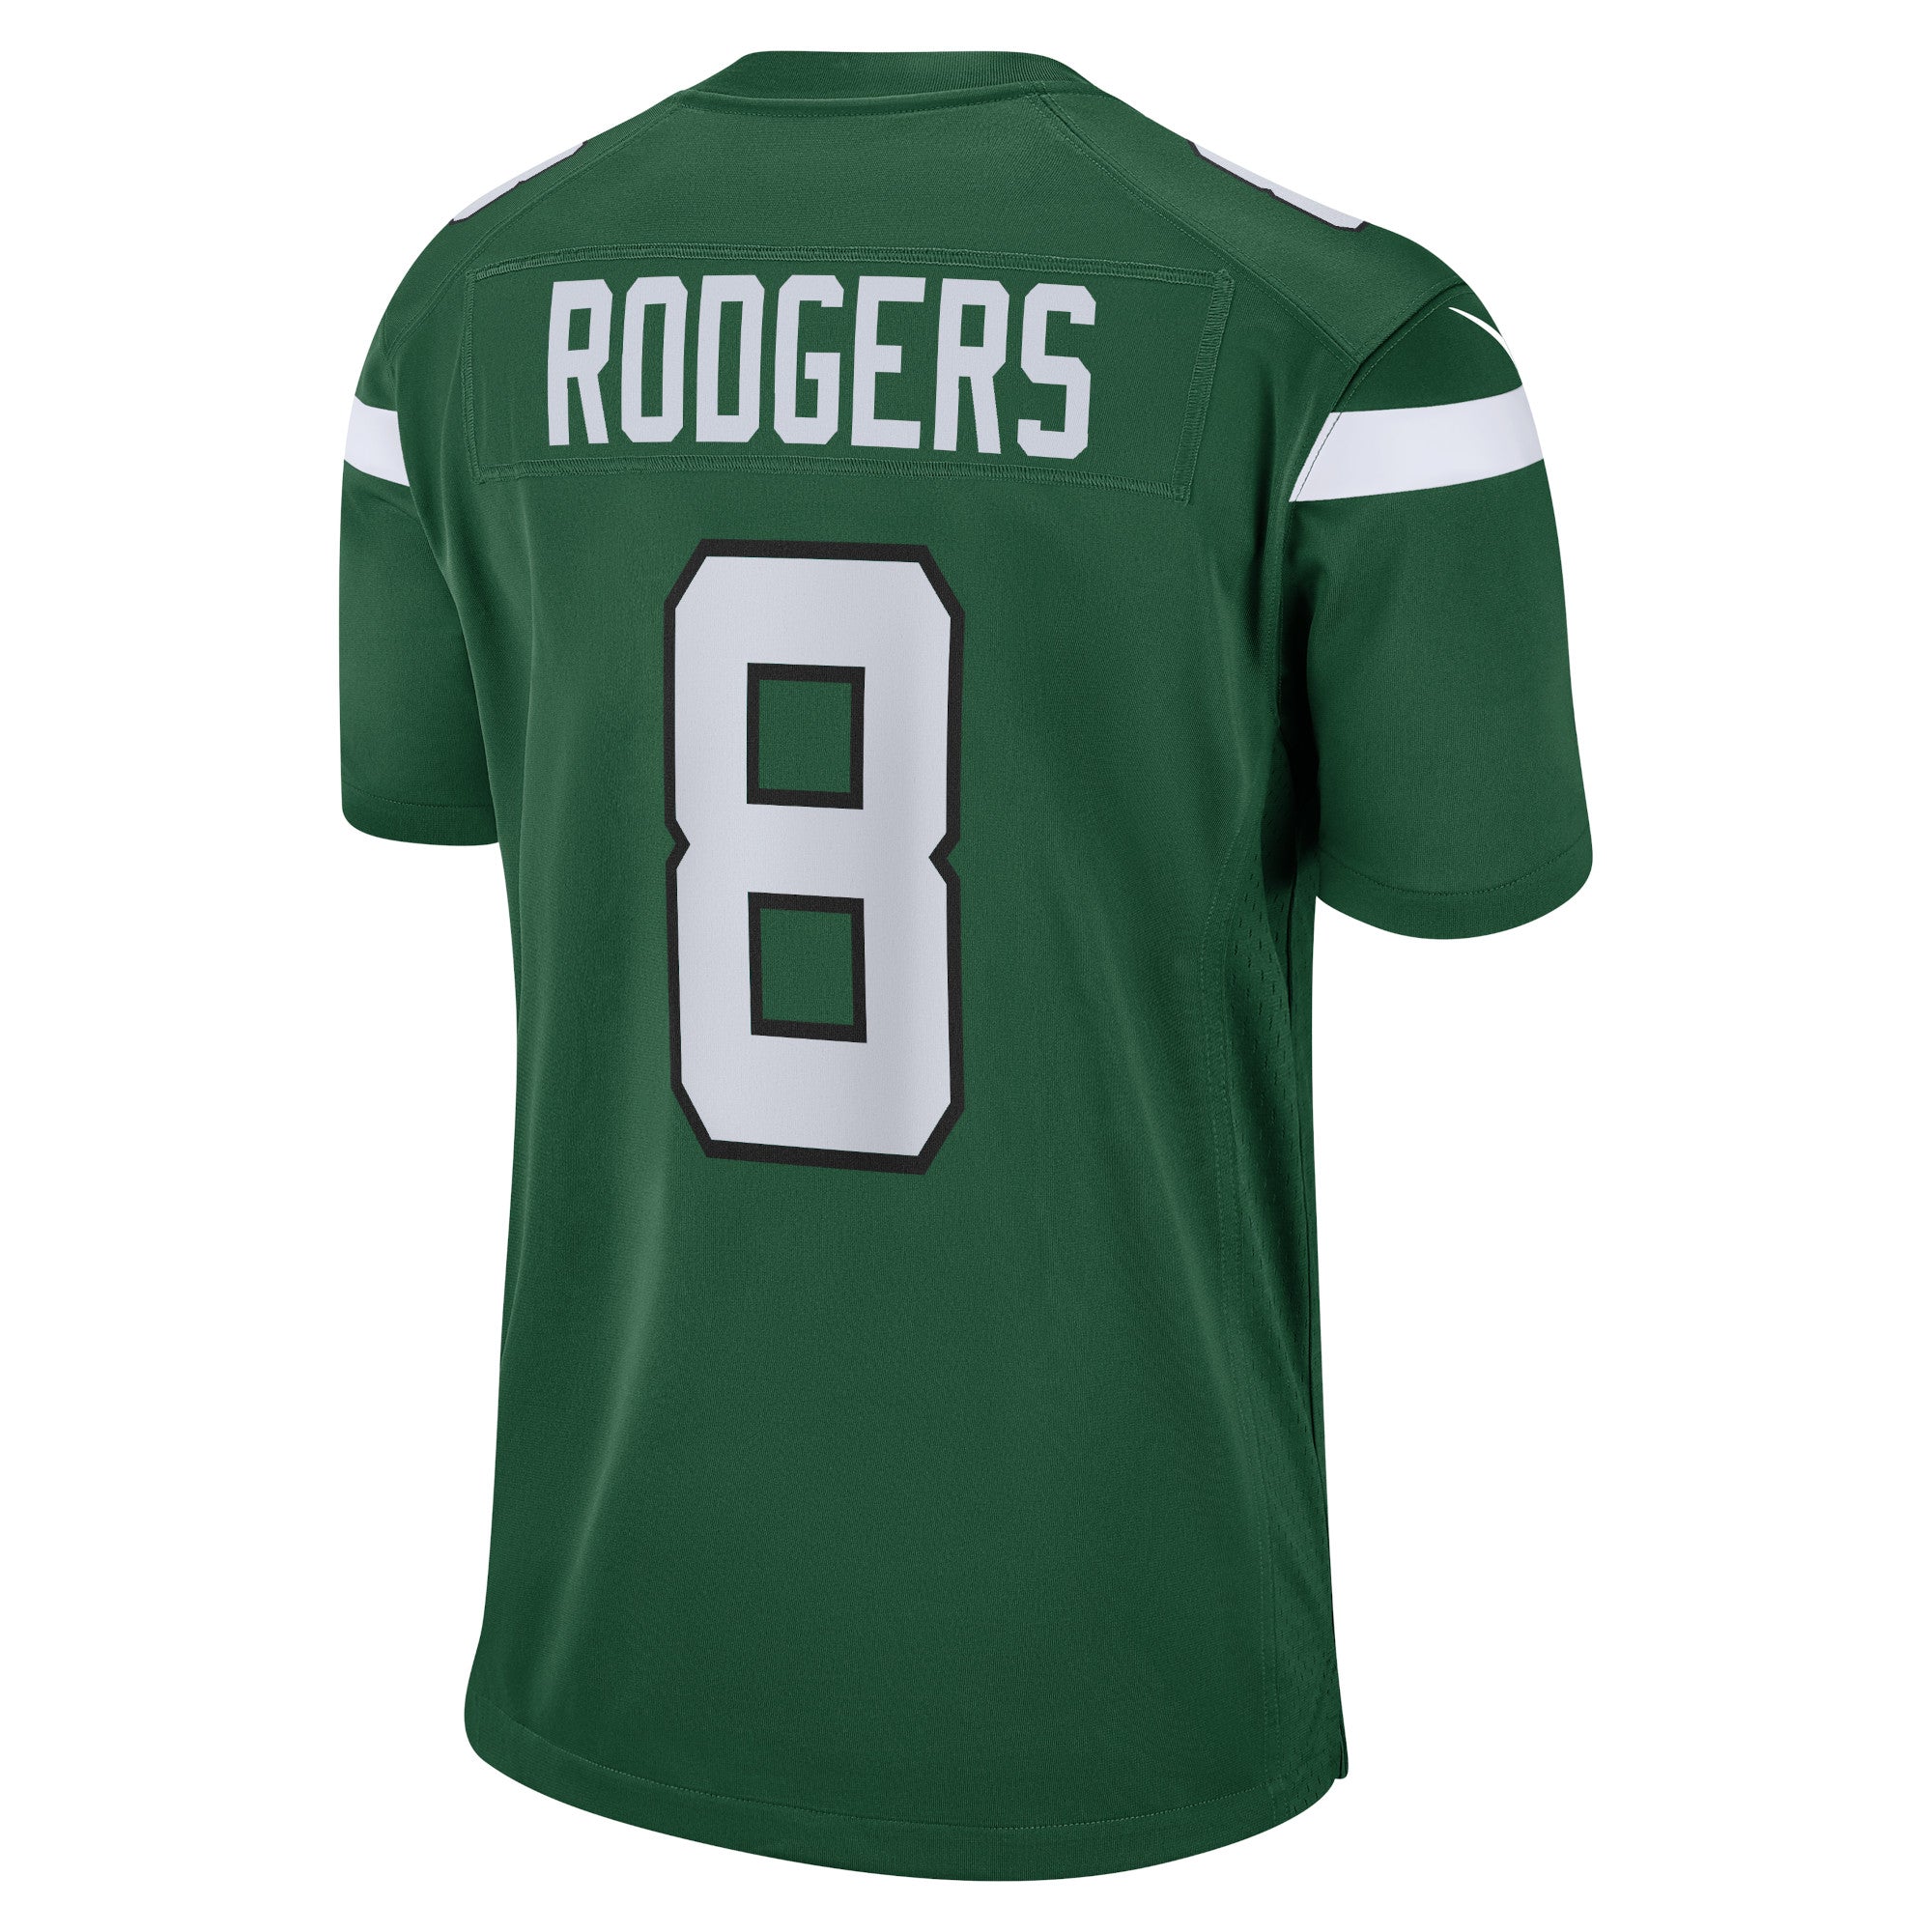 Aaron Rodgers New York Jets Nike NFL Game Jersey - Green